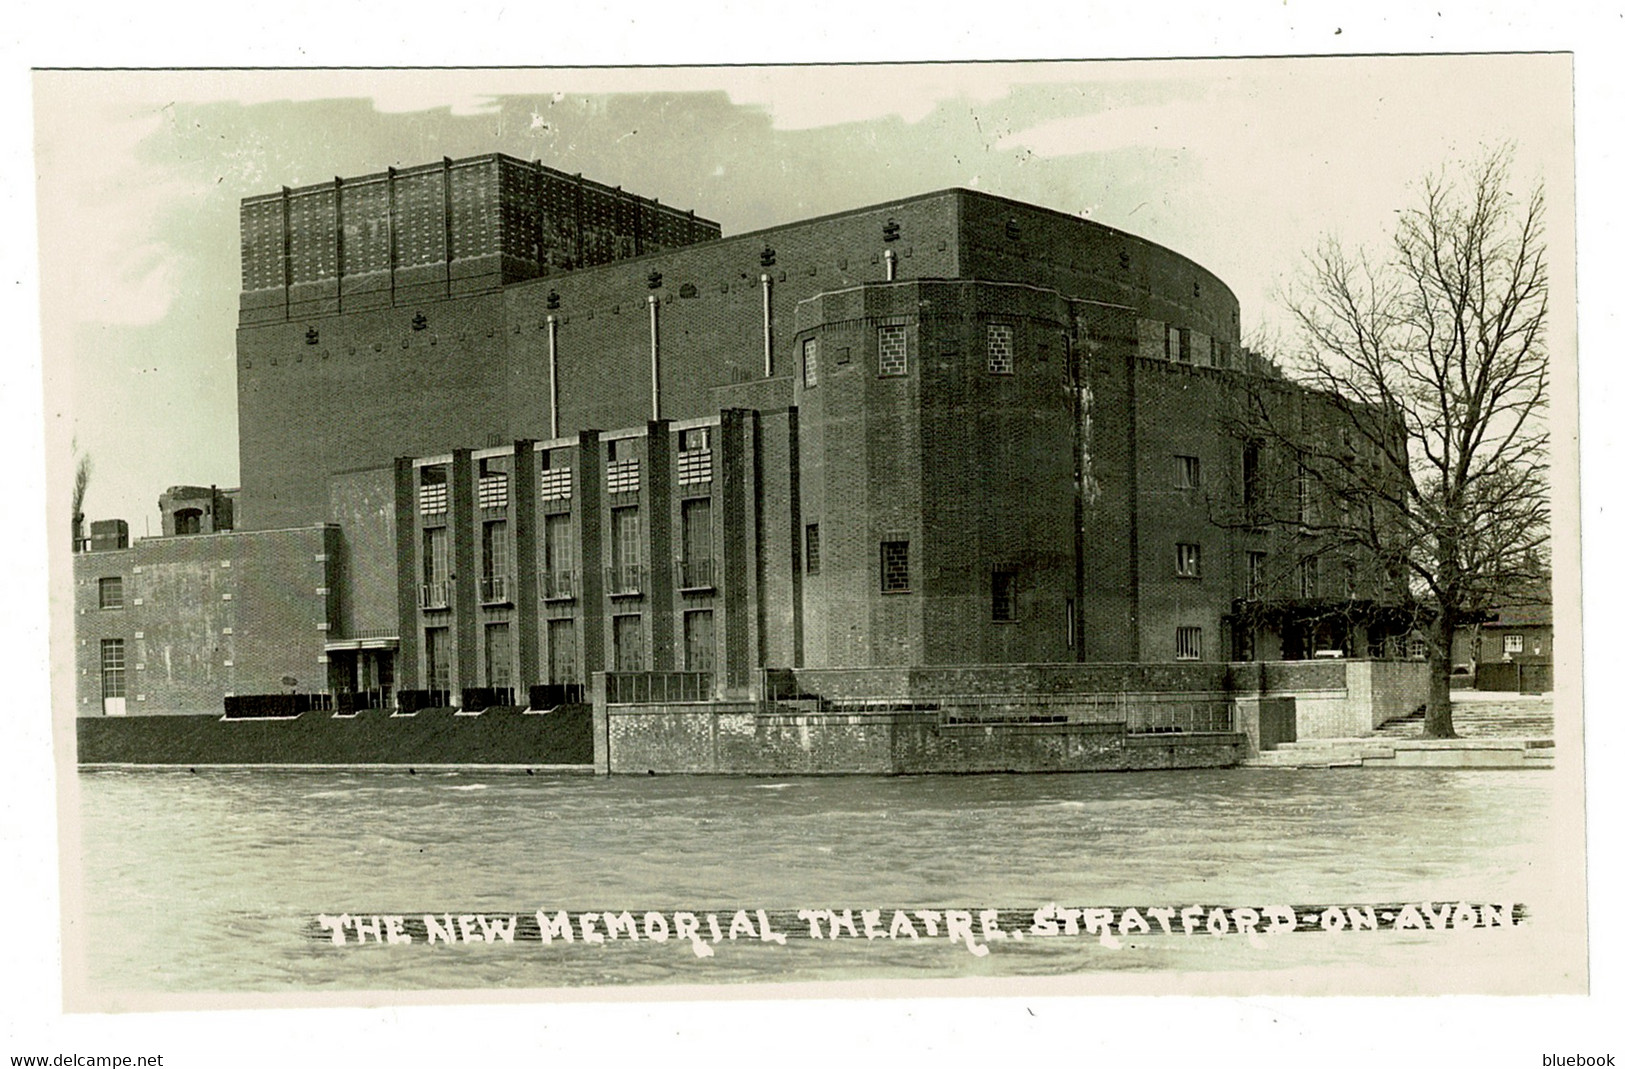 Ref BB 1429  - Early Real Photo Postcard - The New Memorial Theatre - Stratford-on-Avon - Stratford Upon Avon